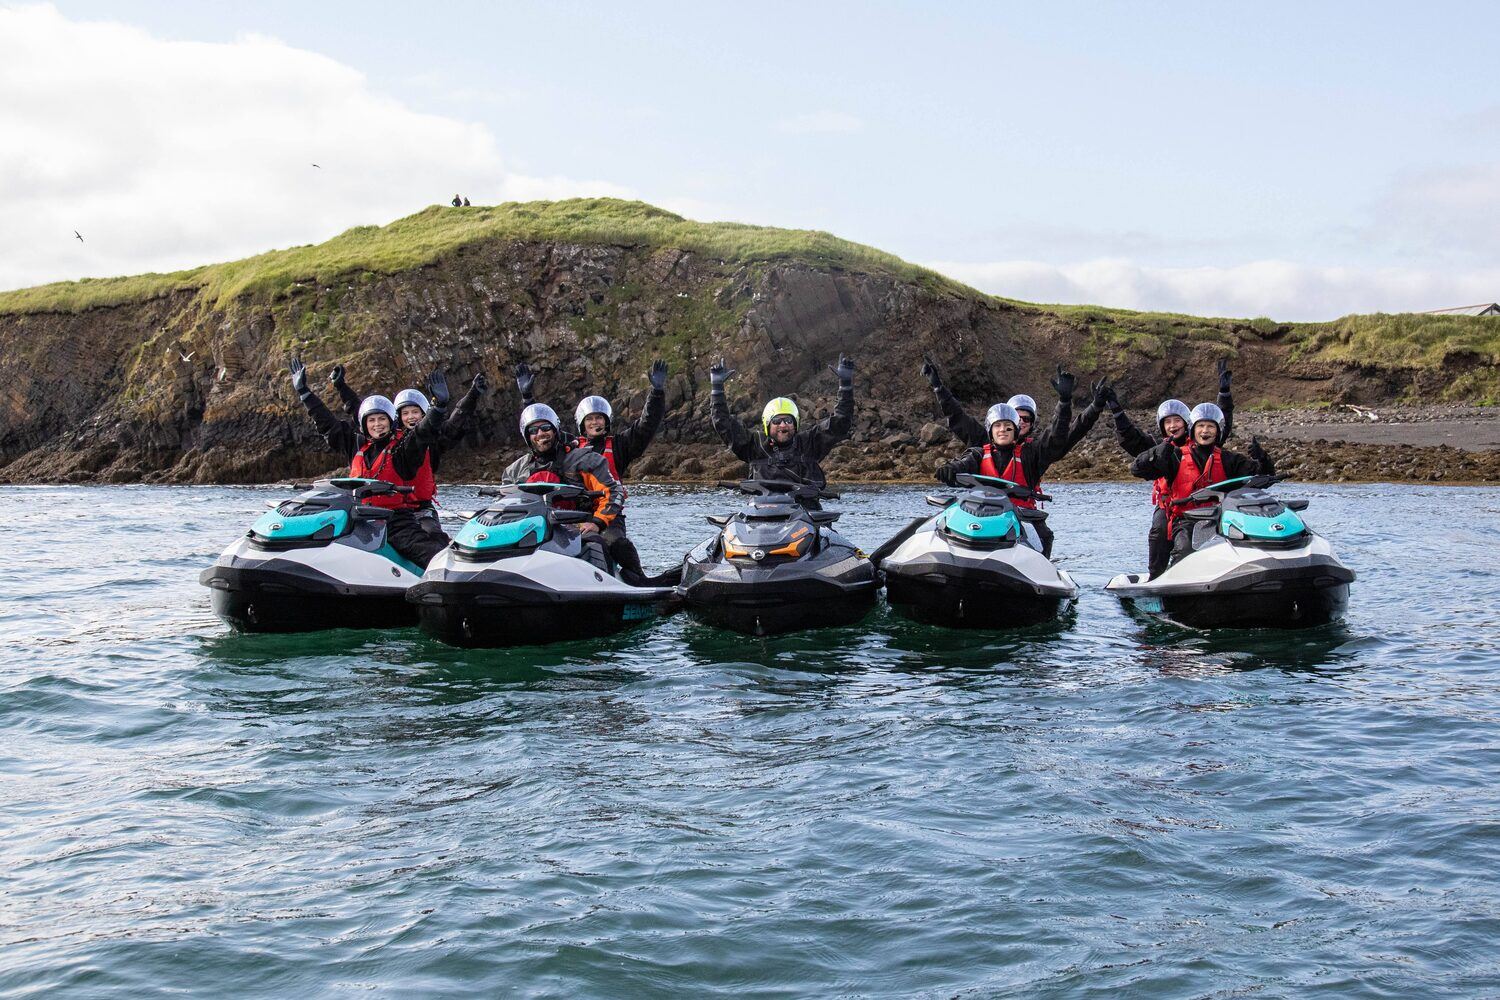 Happy group of tourists on jet skis in the sea in front of cliff in Iceland